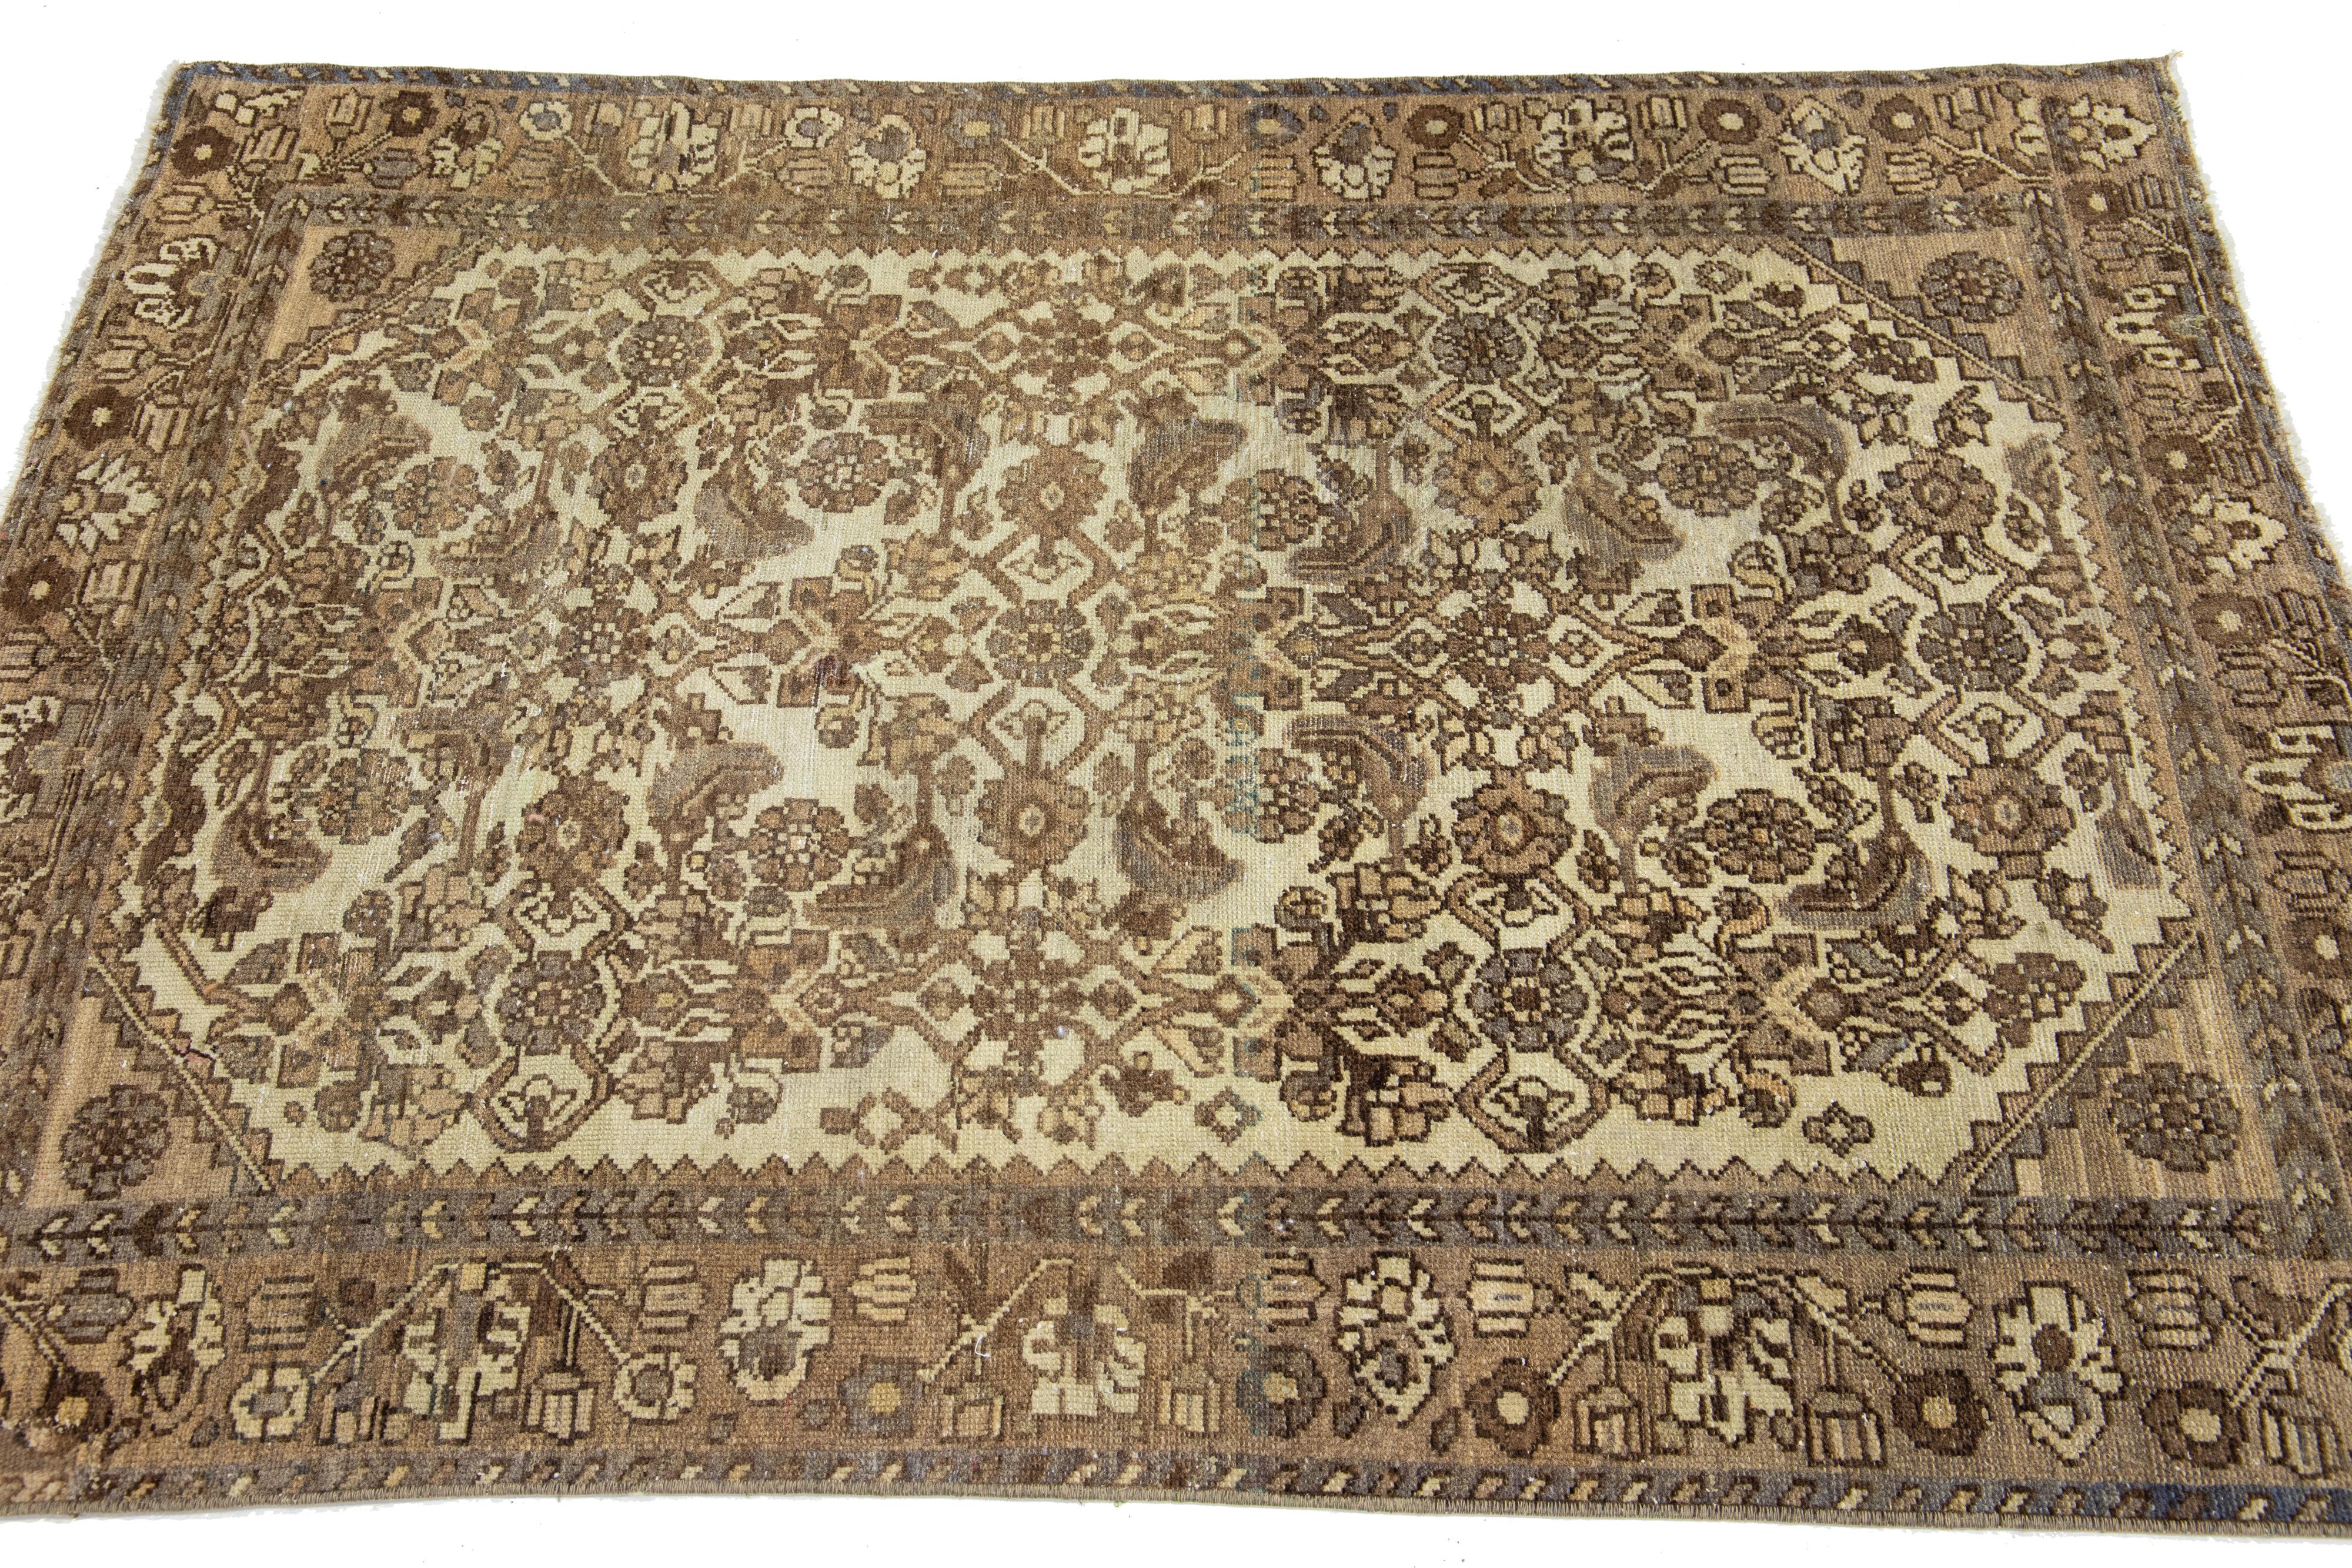 Floral Handmade Antique Persian Malayer Beige Scatter Wool Rug  In Excellent Condition For Sale In Norwalk, CT